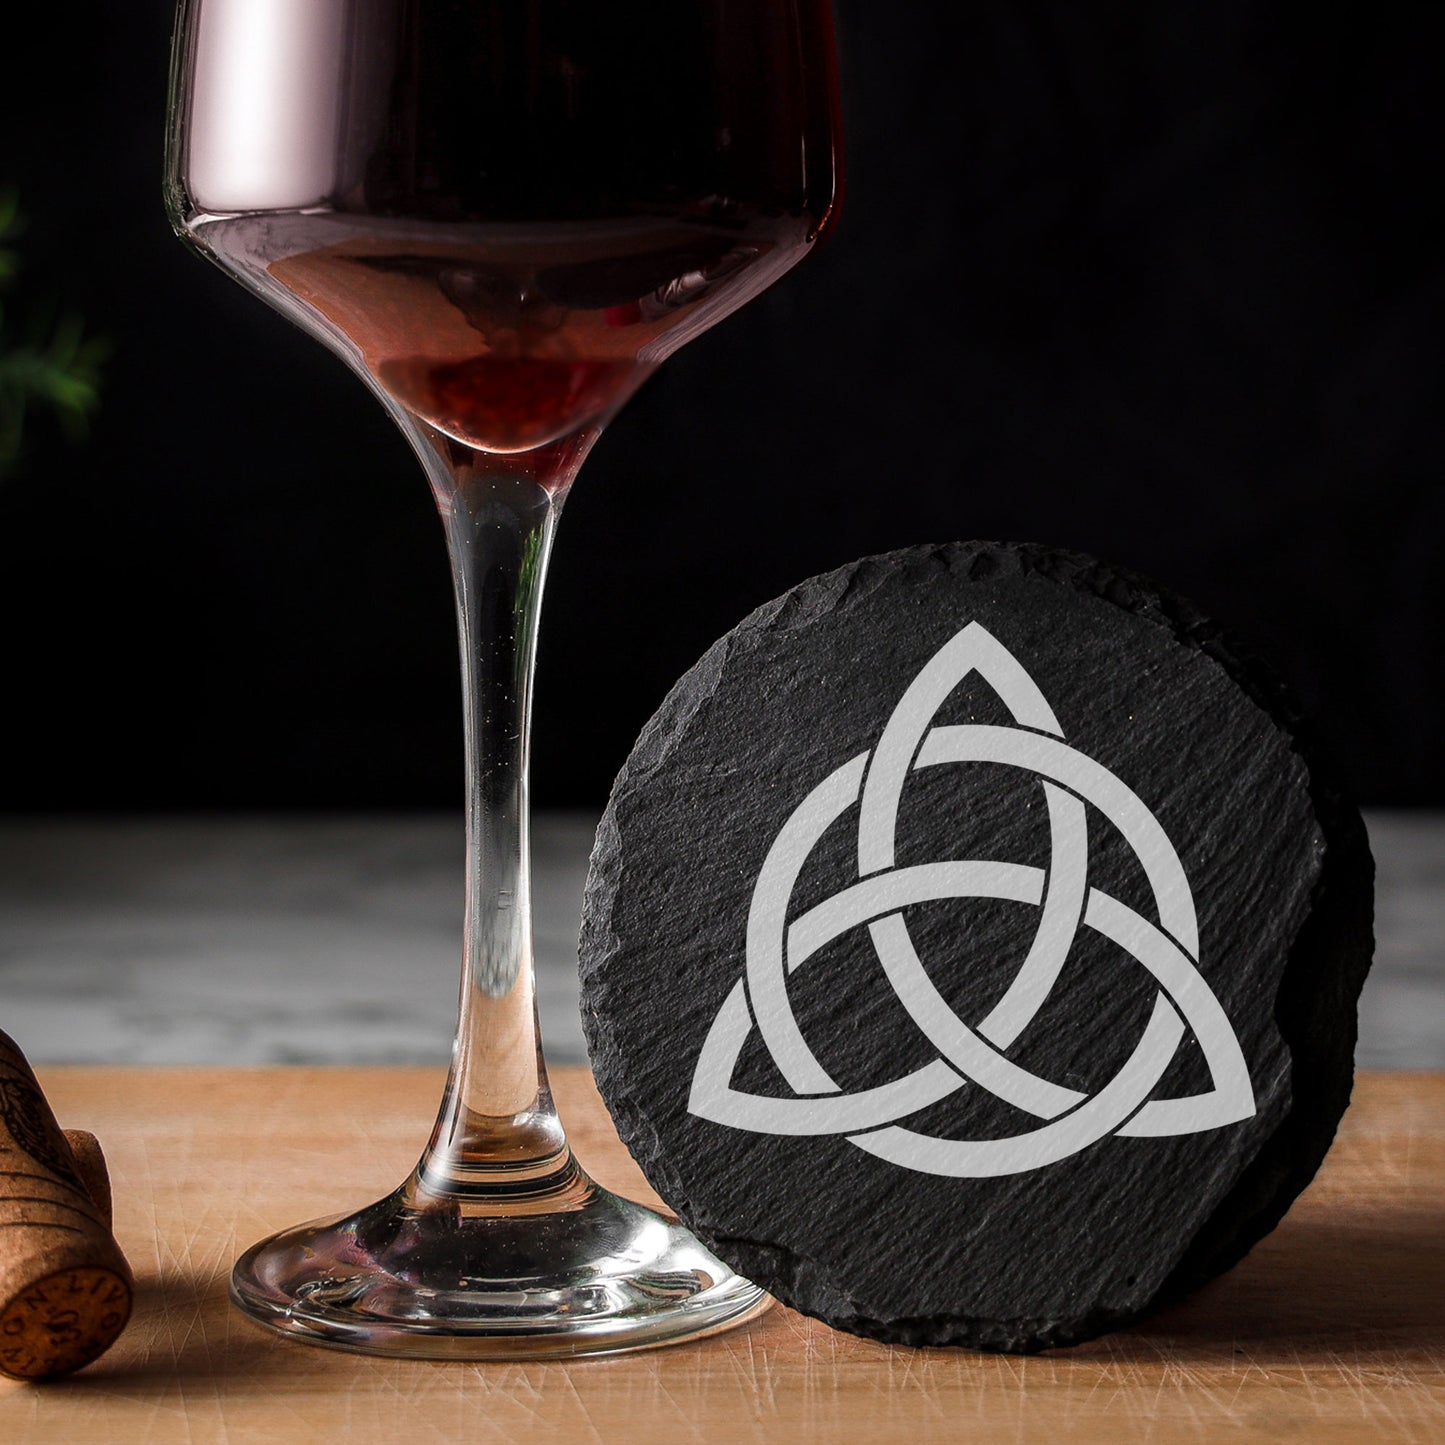 Celtic Knot Irish Engraved Wine Glass and/or Coaster Set  - Always Looking Good - Round Coaster Only  